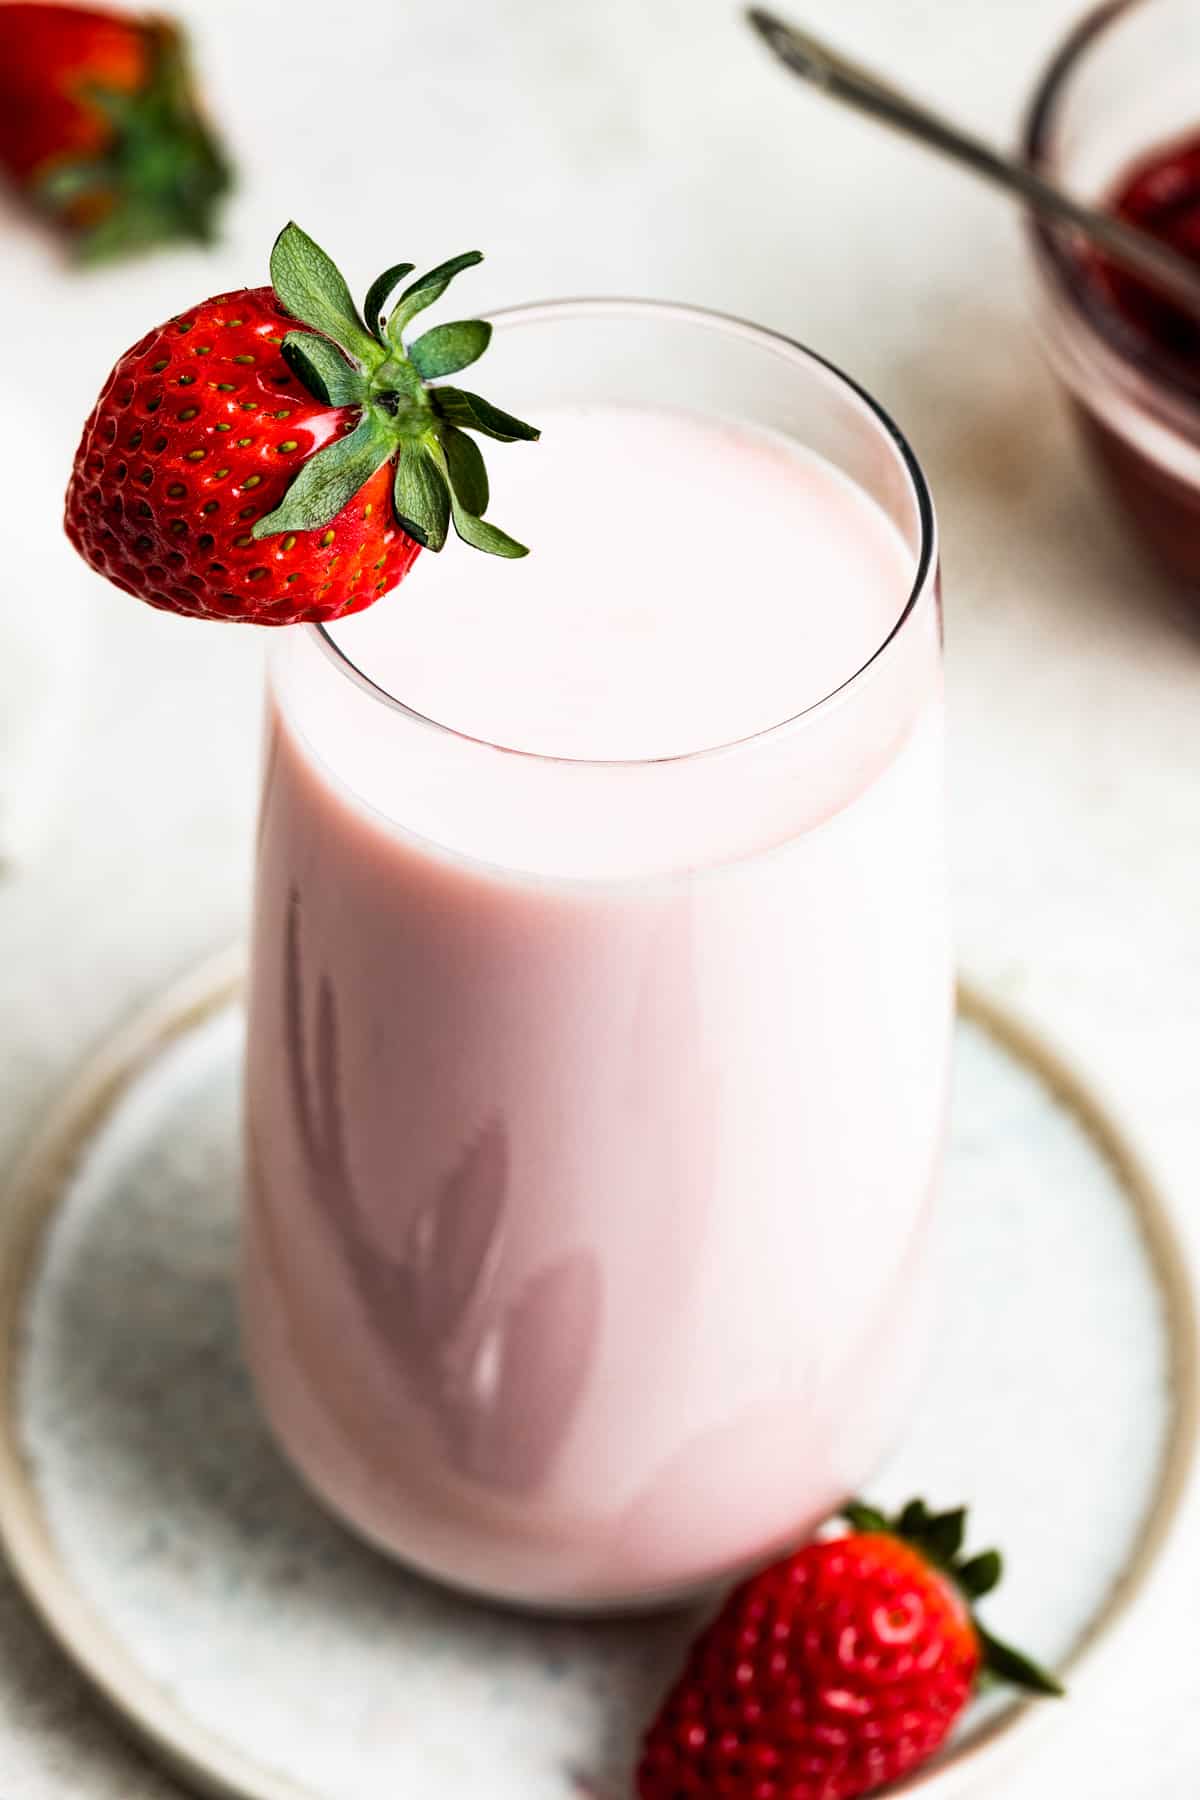 Strawberry milk in a glass with a strawberry on the edge of the glass.